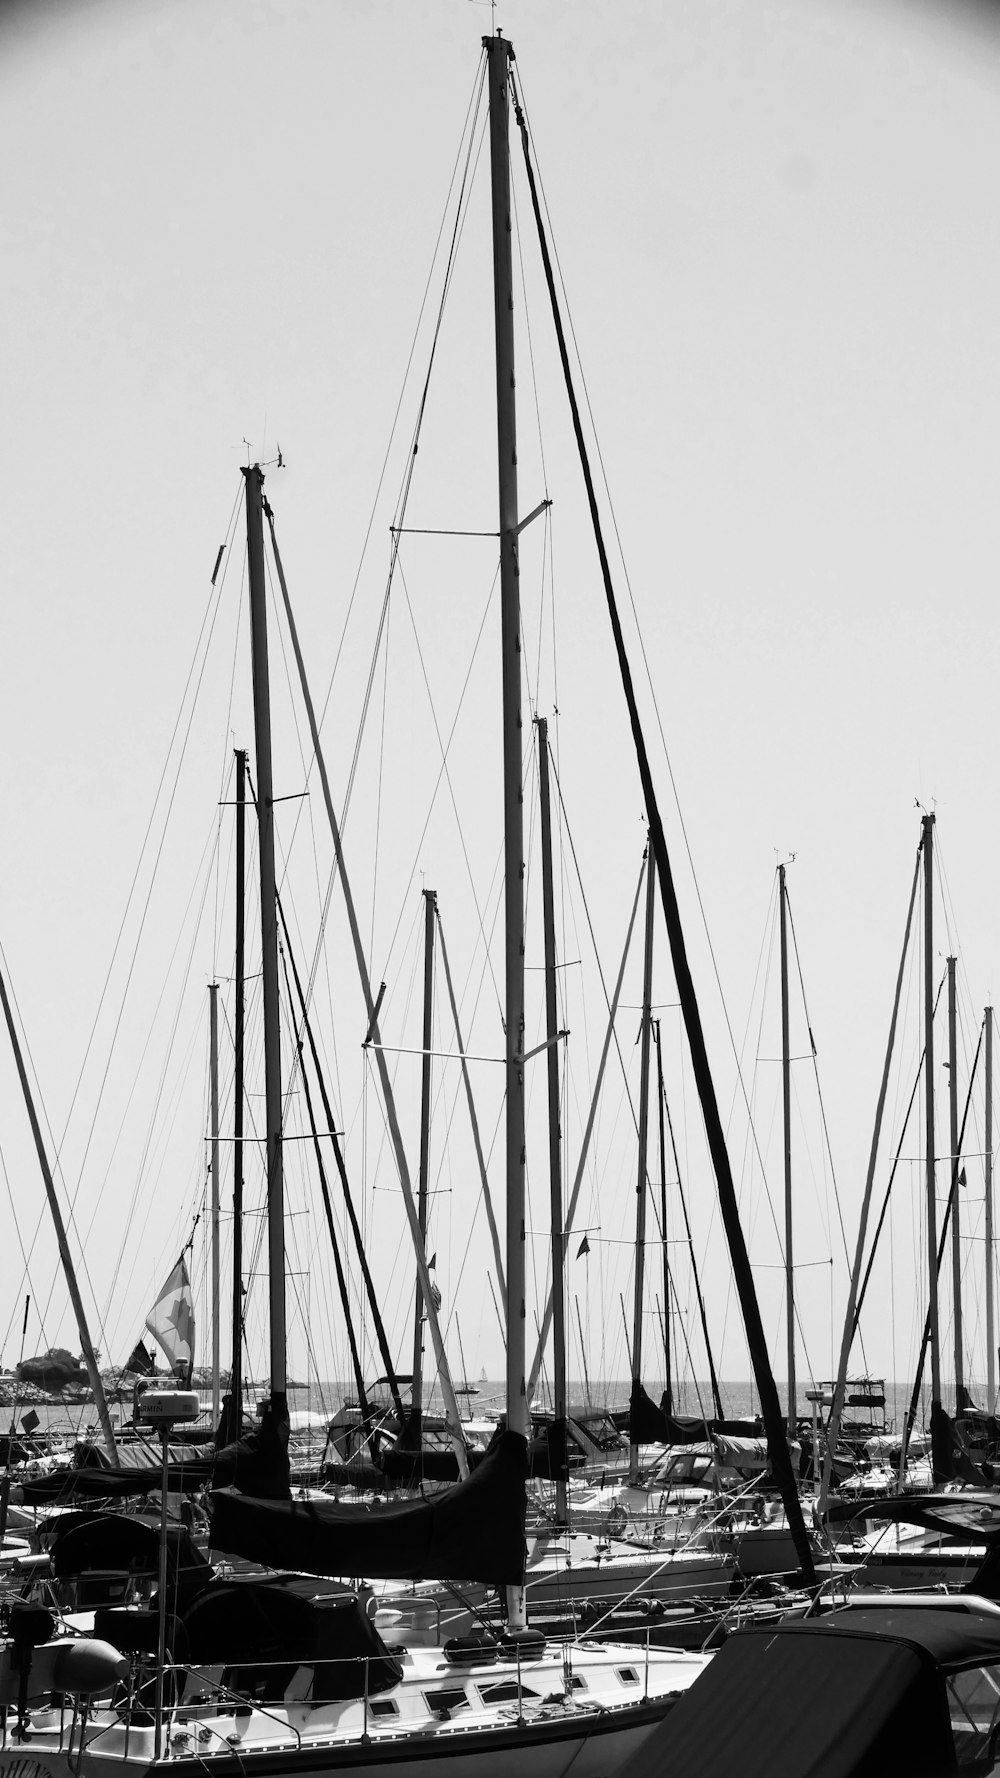 yachts at the harbor in grayscale photo